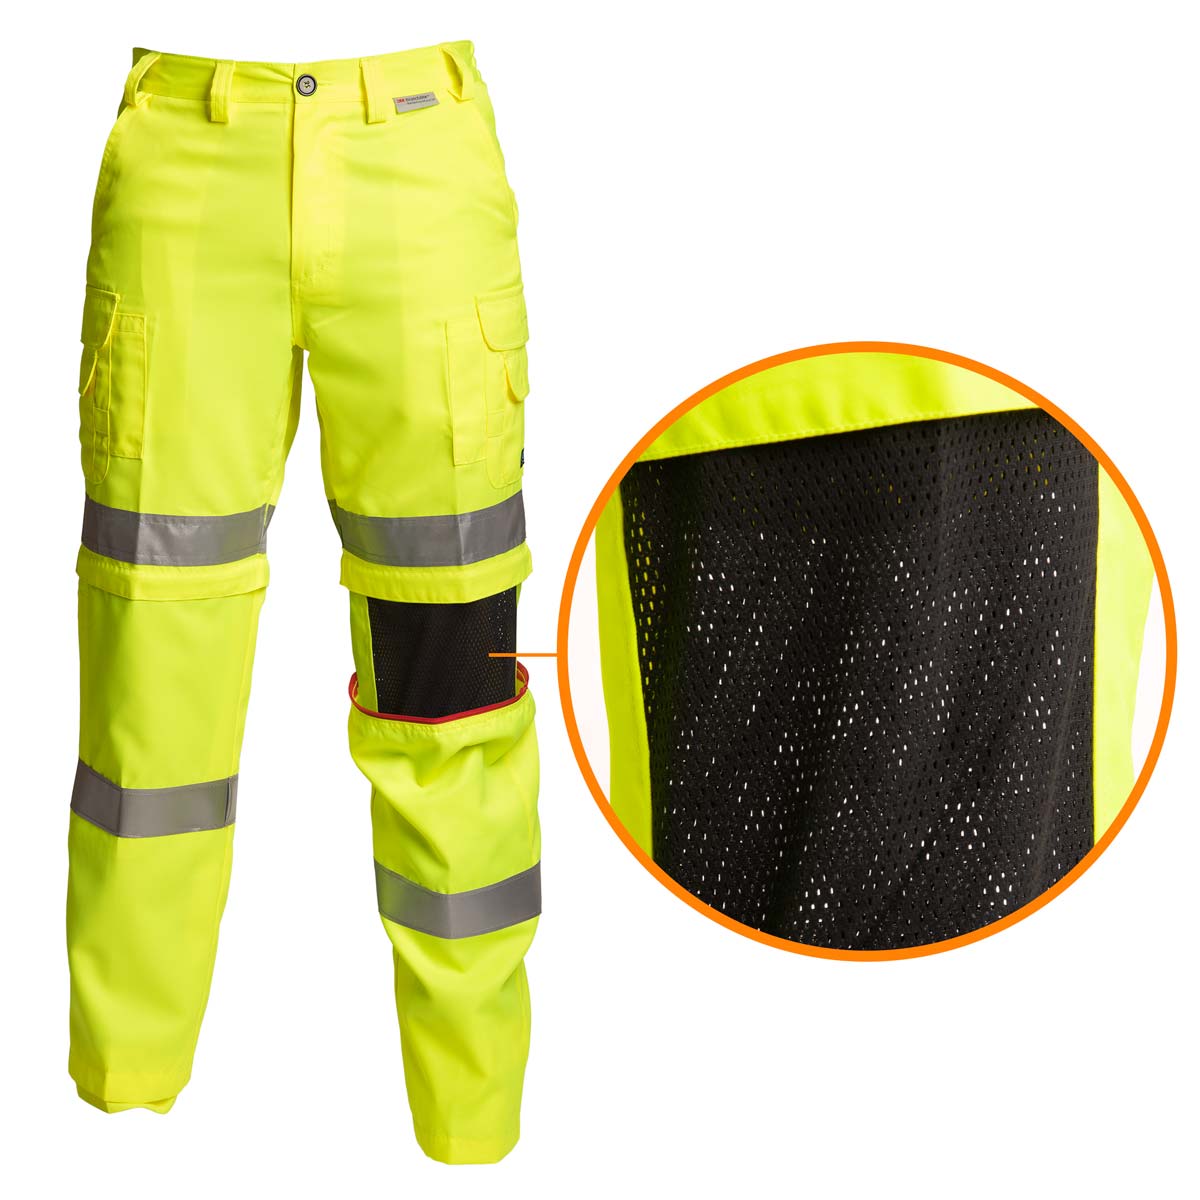 Coolworks Pants - Hi-Vis Lime-Yellow with Closeup of Mesh